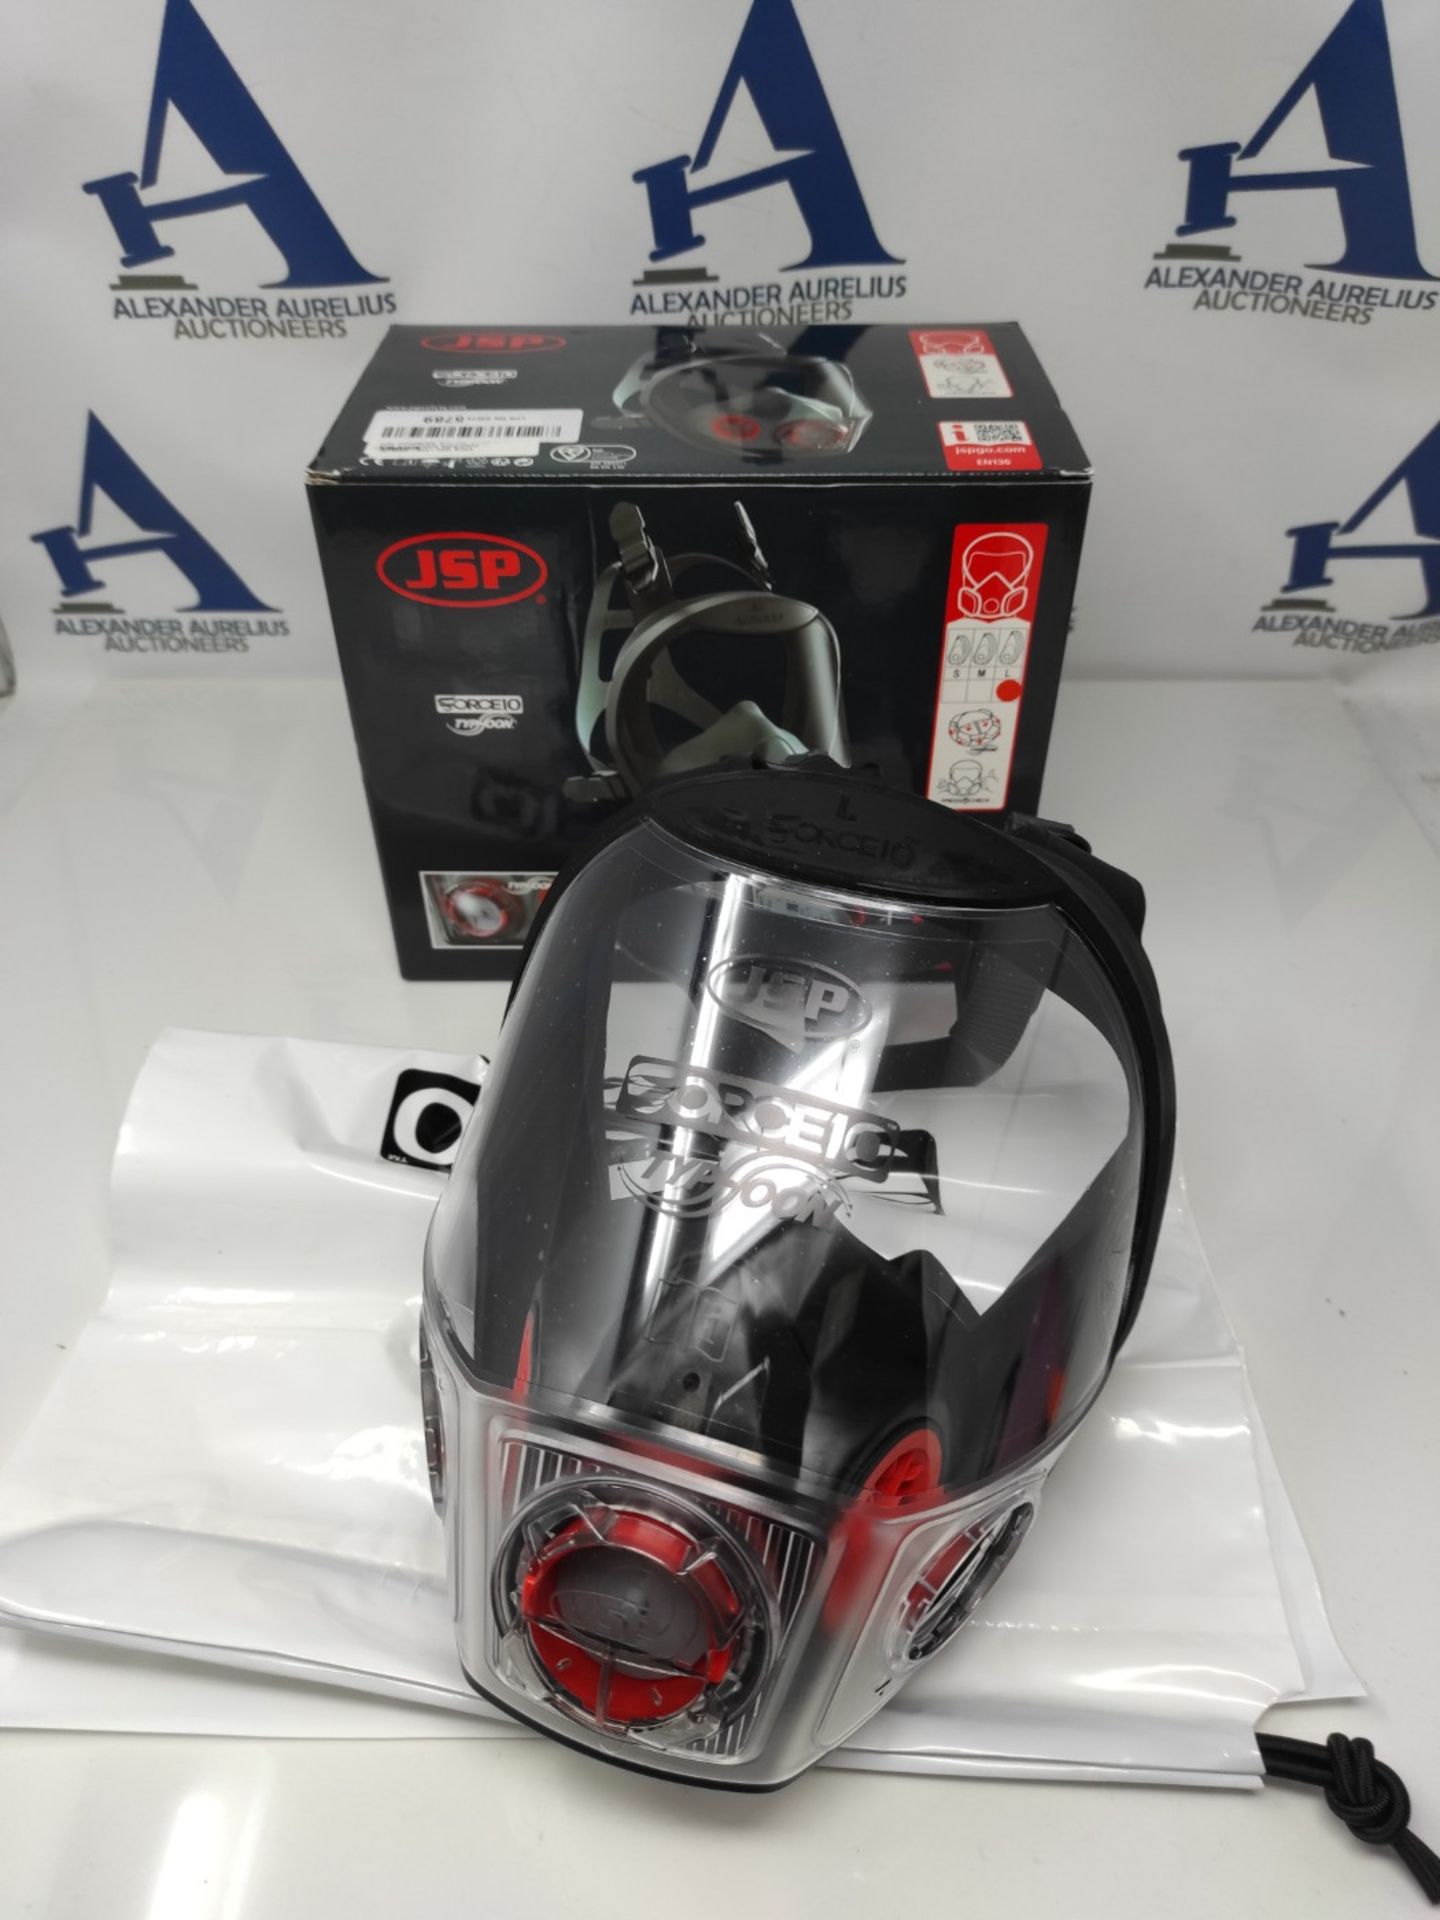 RRP £70.00 JSP Force 10 Large Full Face Mask Respirator only compatible with JSP Press to Check F - Image 2 of 2